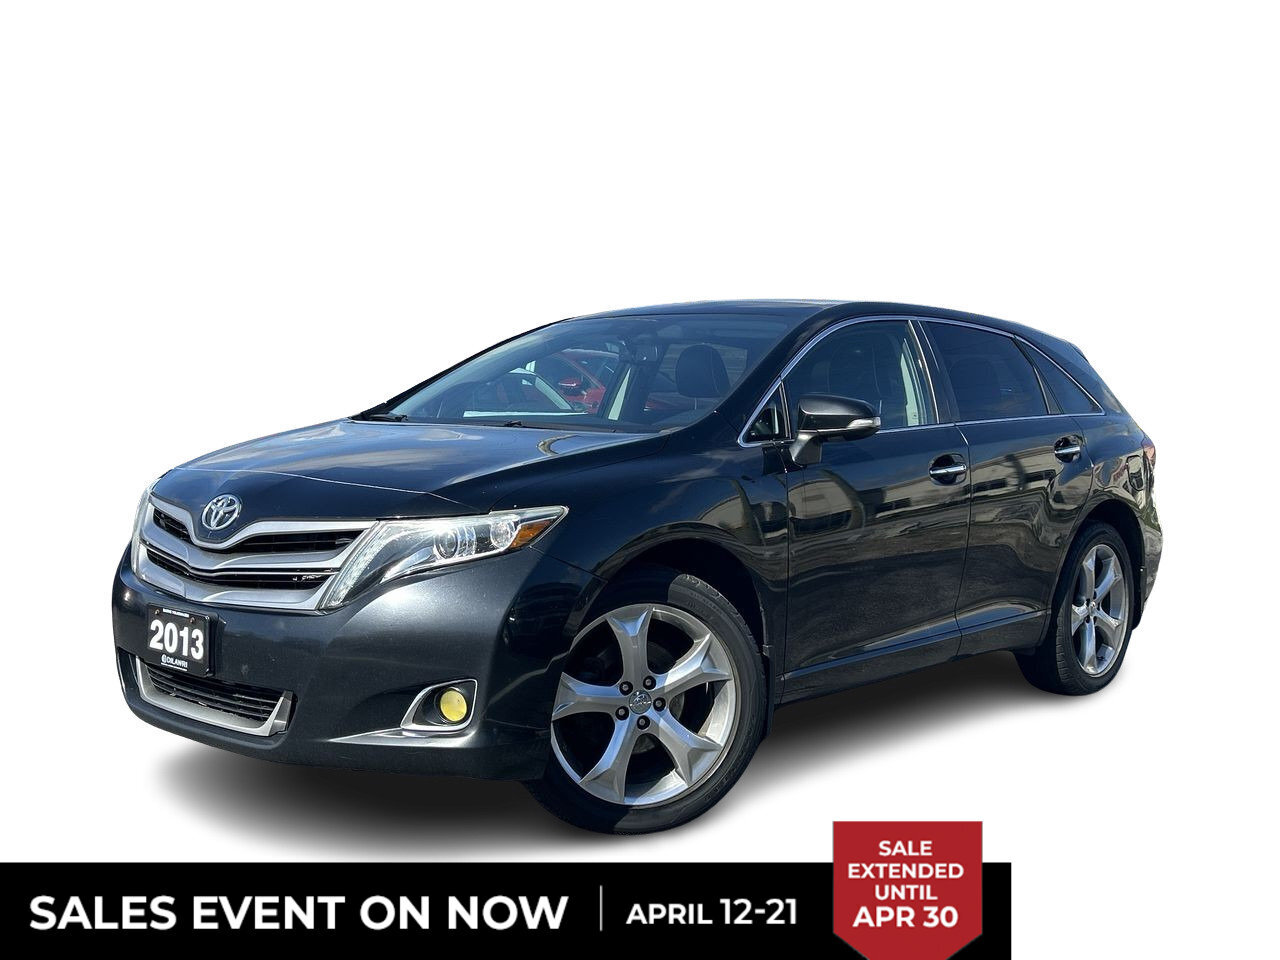 2013 Toyota Venza V6 AWD 6A HEATED SEATS | CLEAN CARFAX REPORT | AWD